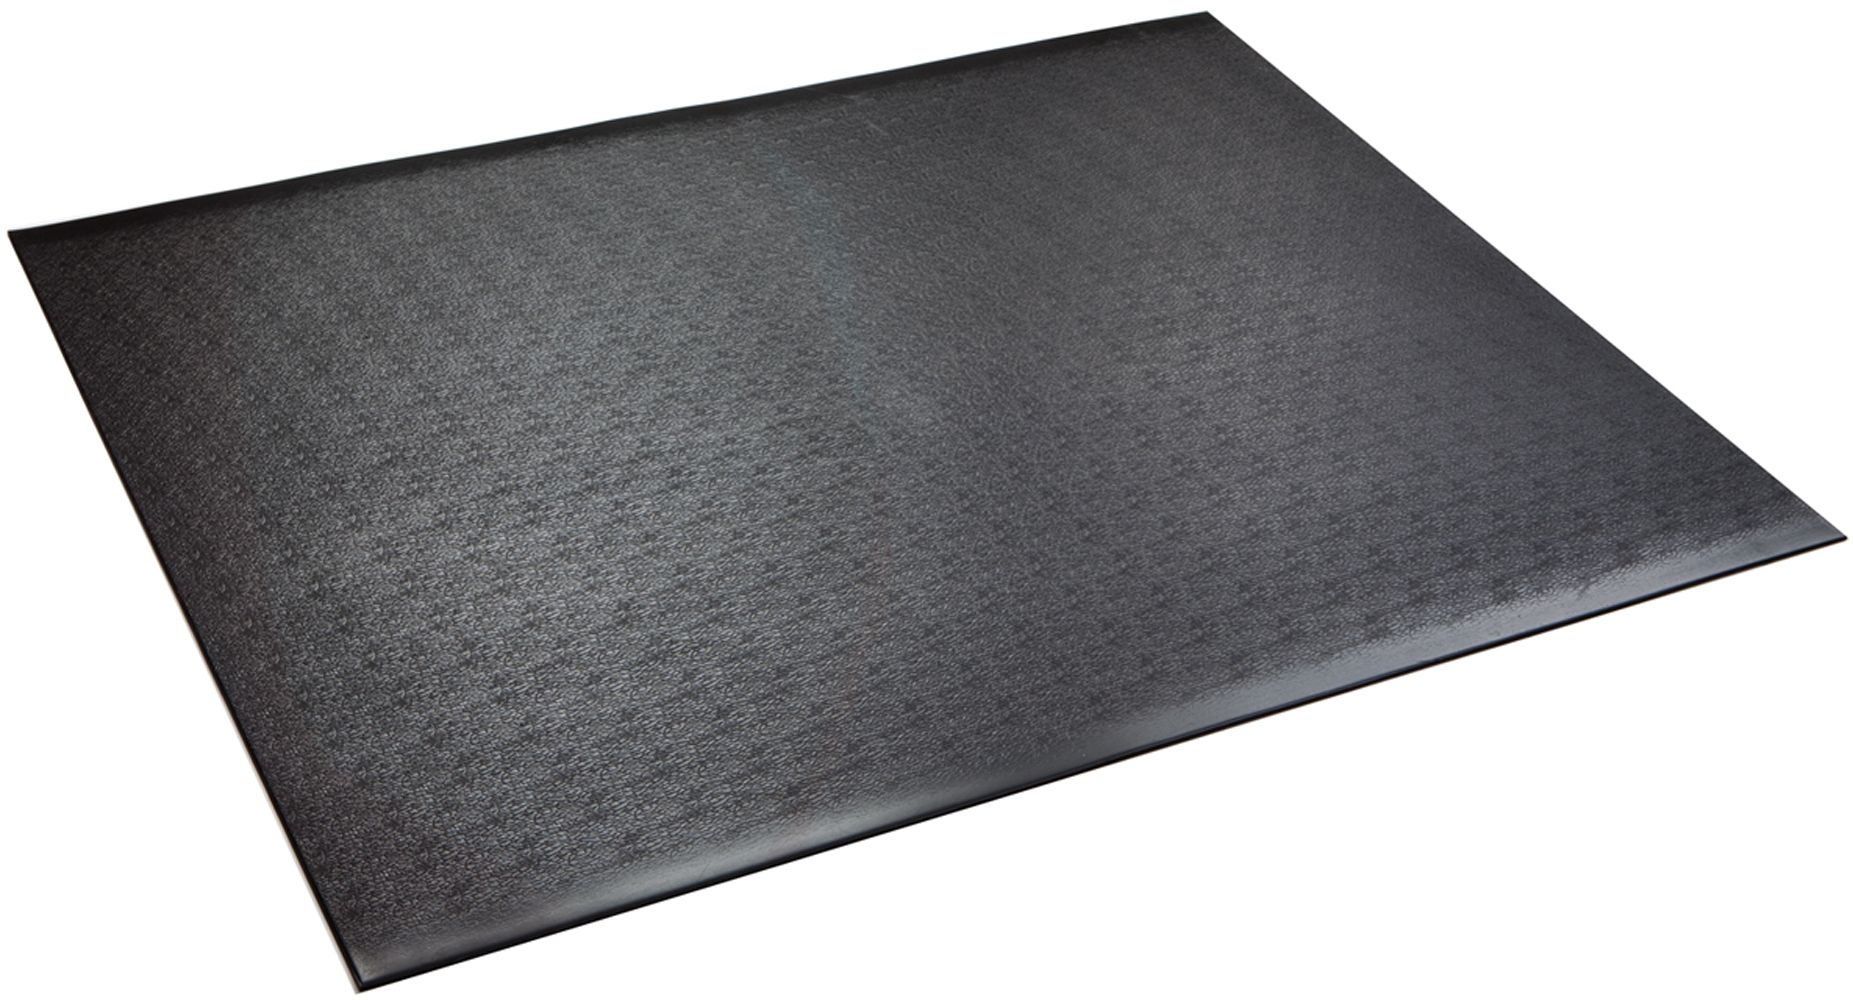 SuperMats Home Gym Mat | DICK'S Sporting Goods